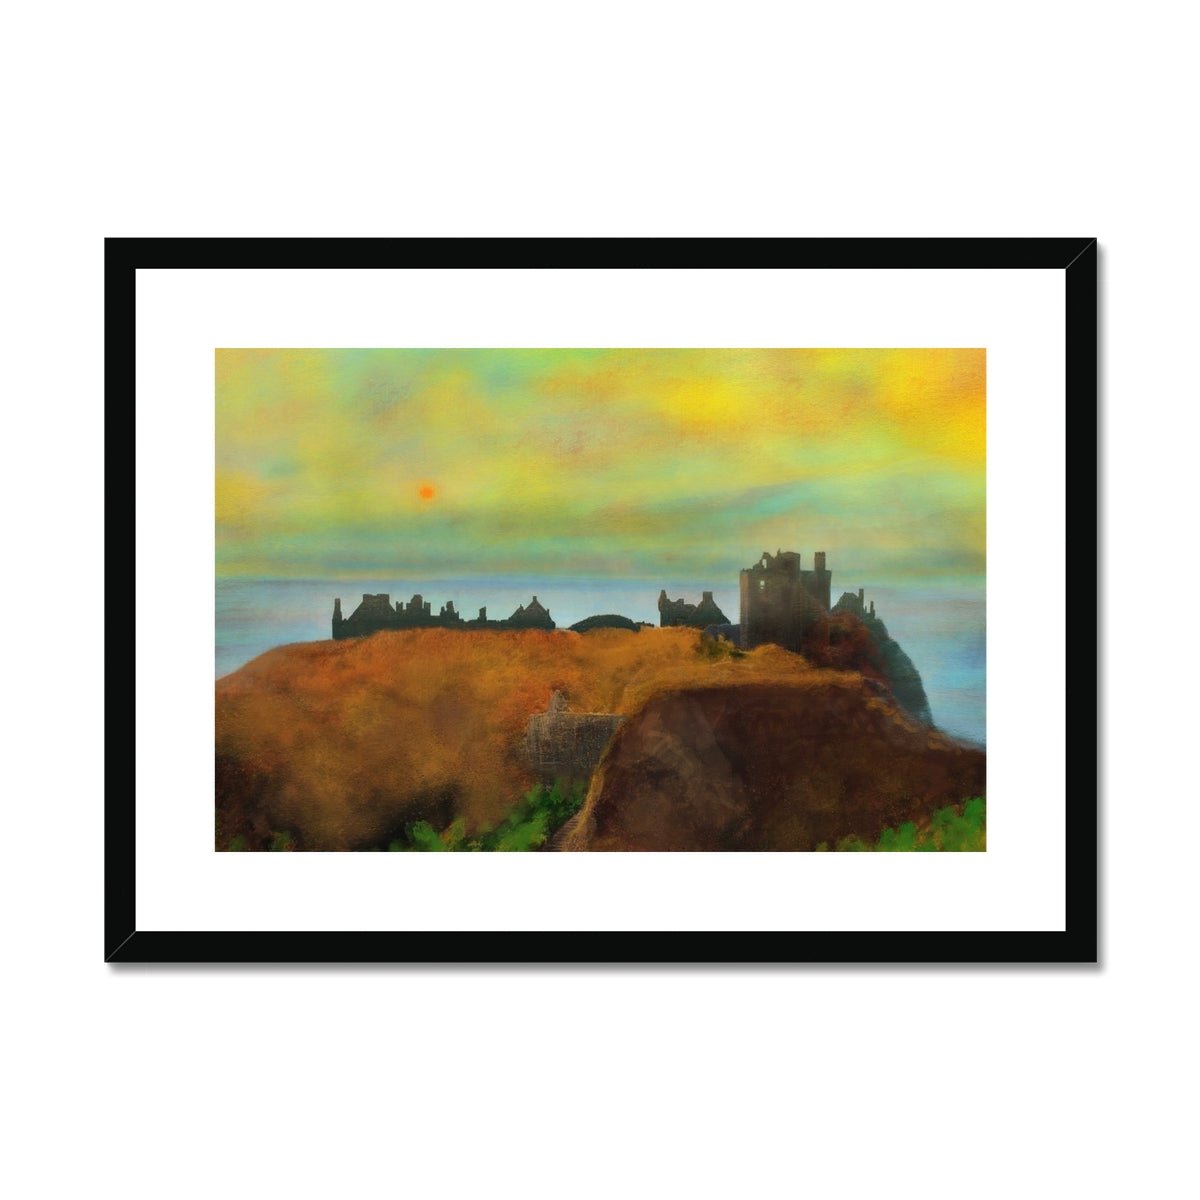 Dunnottar Castle Dusk Dusk Painting | Framed & Mounted Prints From Scotland-Framed & Mounted Prints-Historic & Iconic Scotland Art Gallery-A2 Landscape-Black Frame-Paintings, Prints, Homeware, Art Gifts From Scotland By Scottish Artist Kevin Hunter